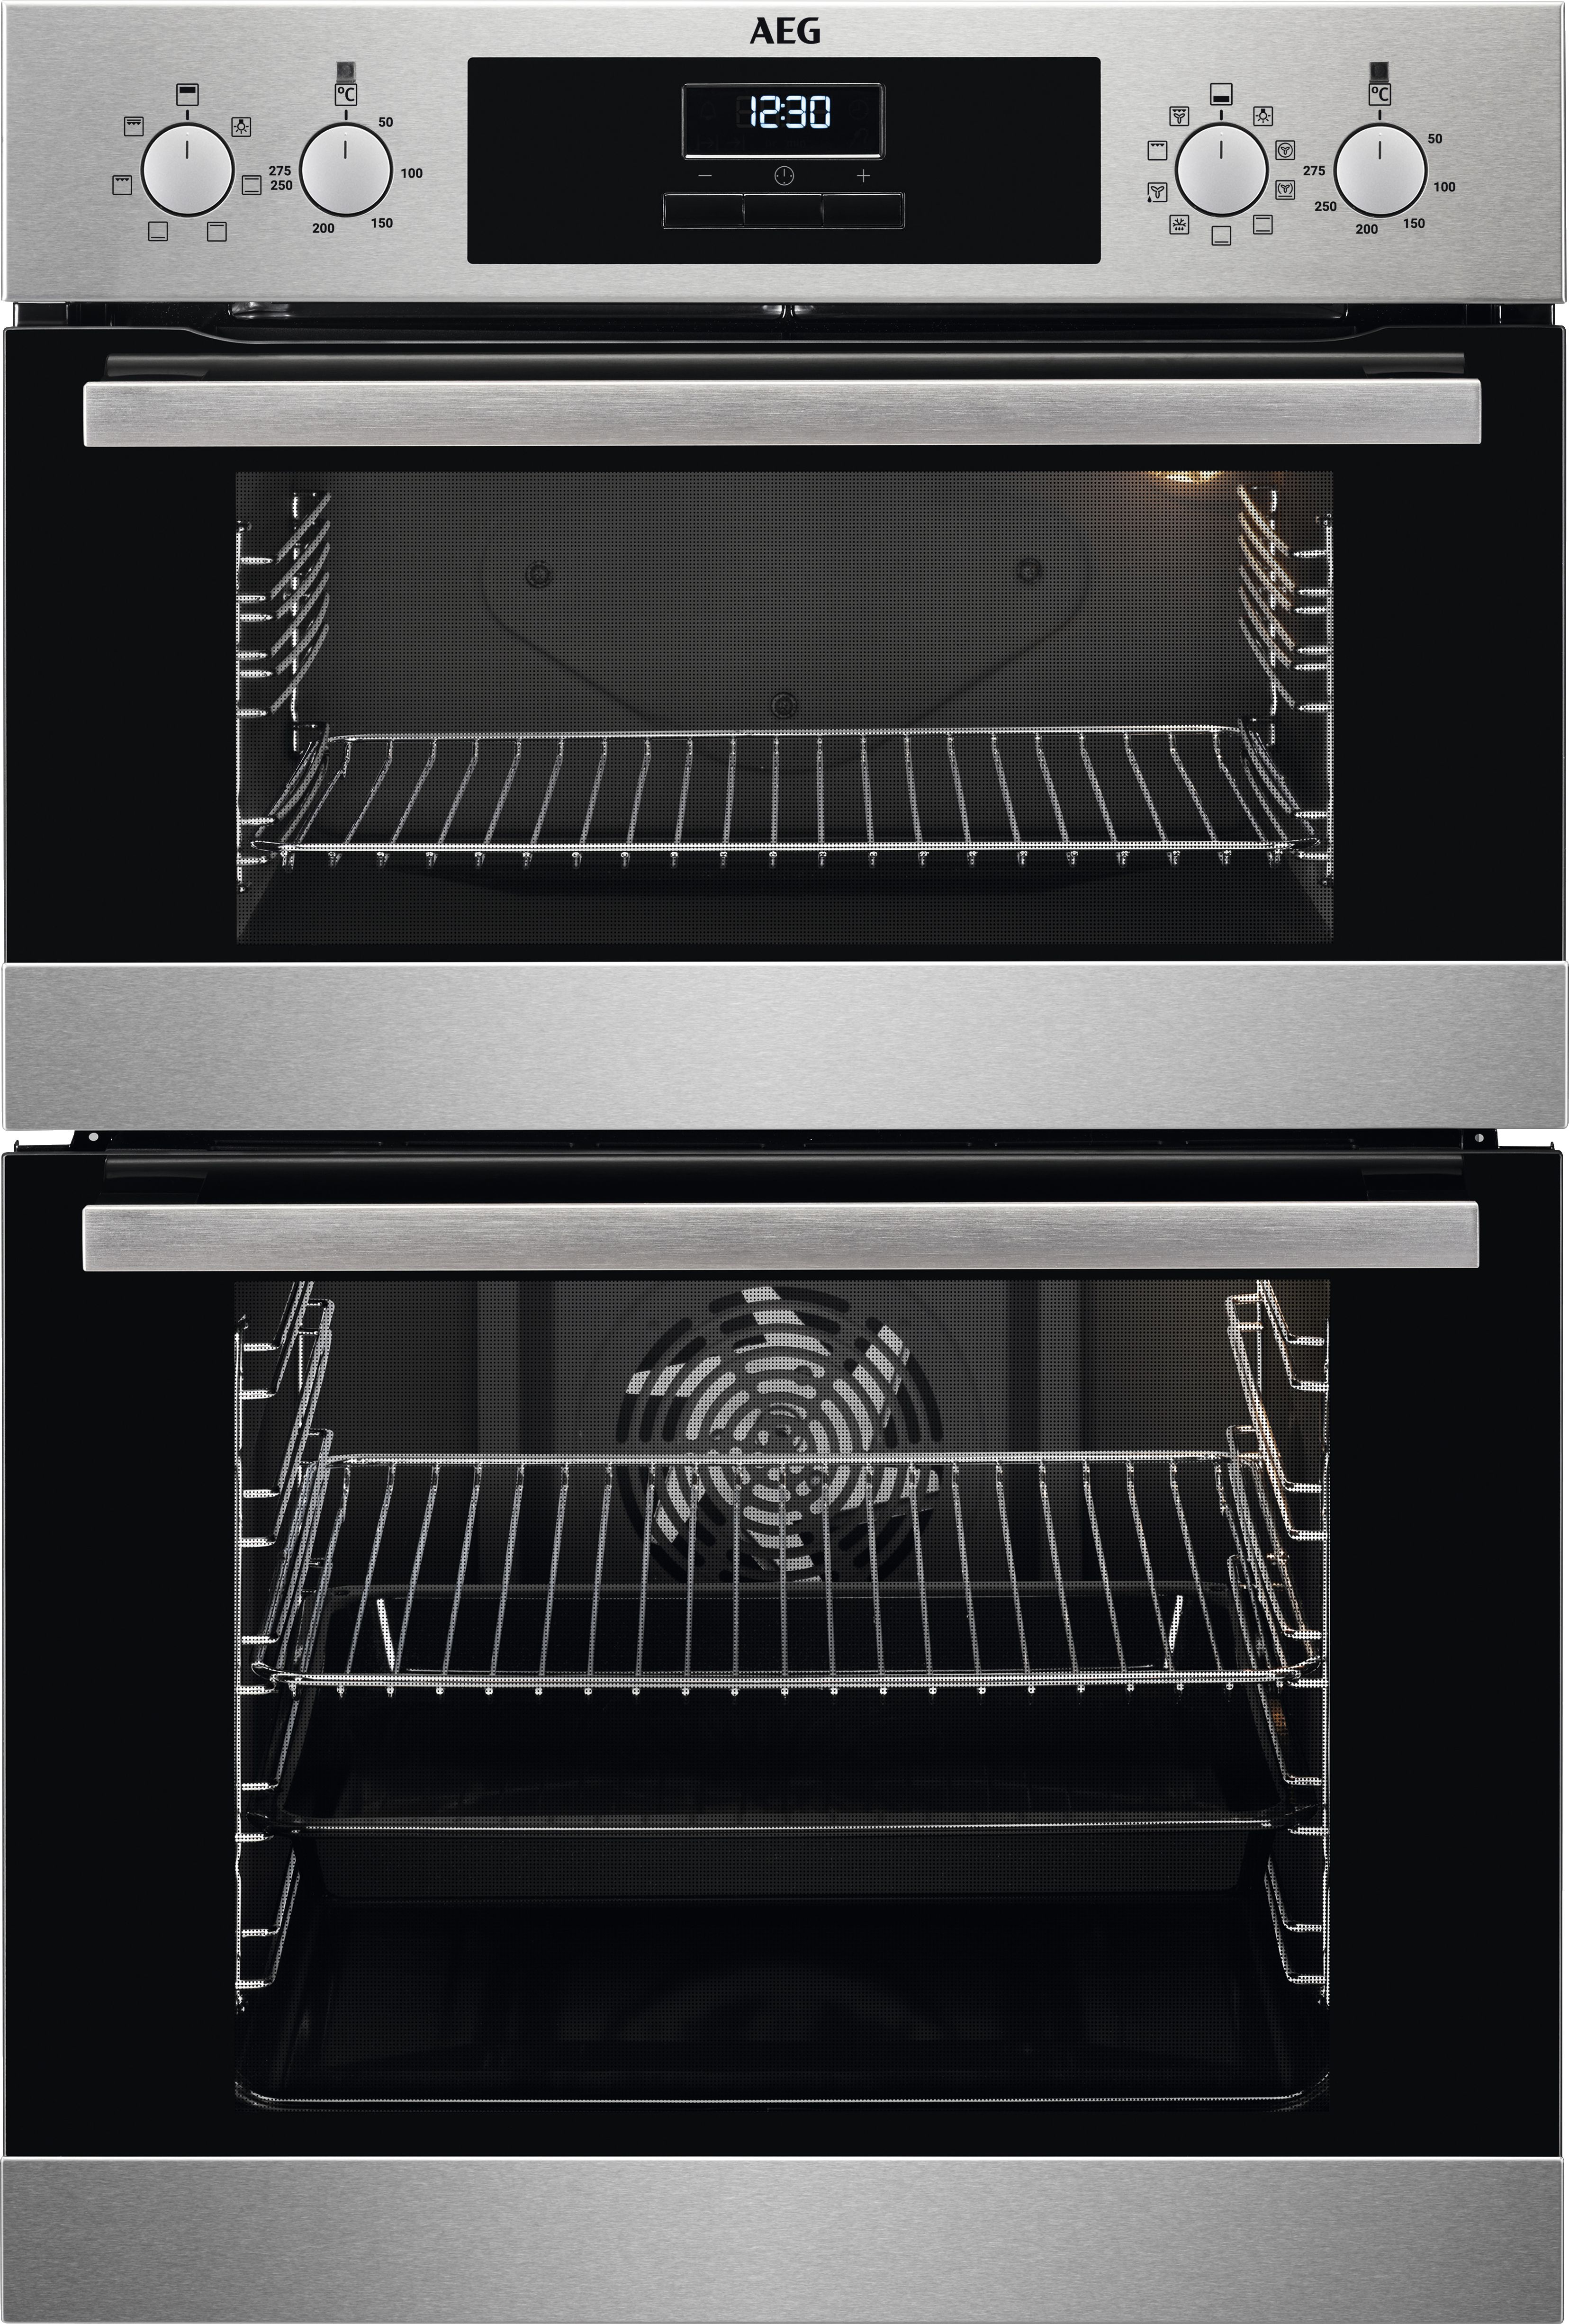 AEG DCB331010M Built In Electric Double Oven - Stainless Steel - A/A Rated, Stainless Steel